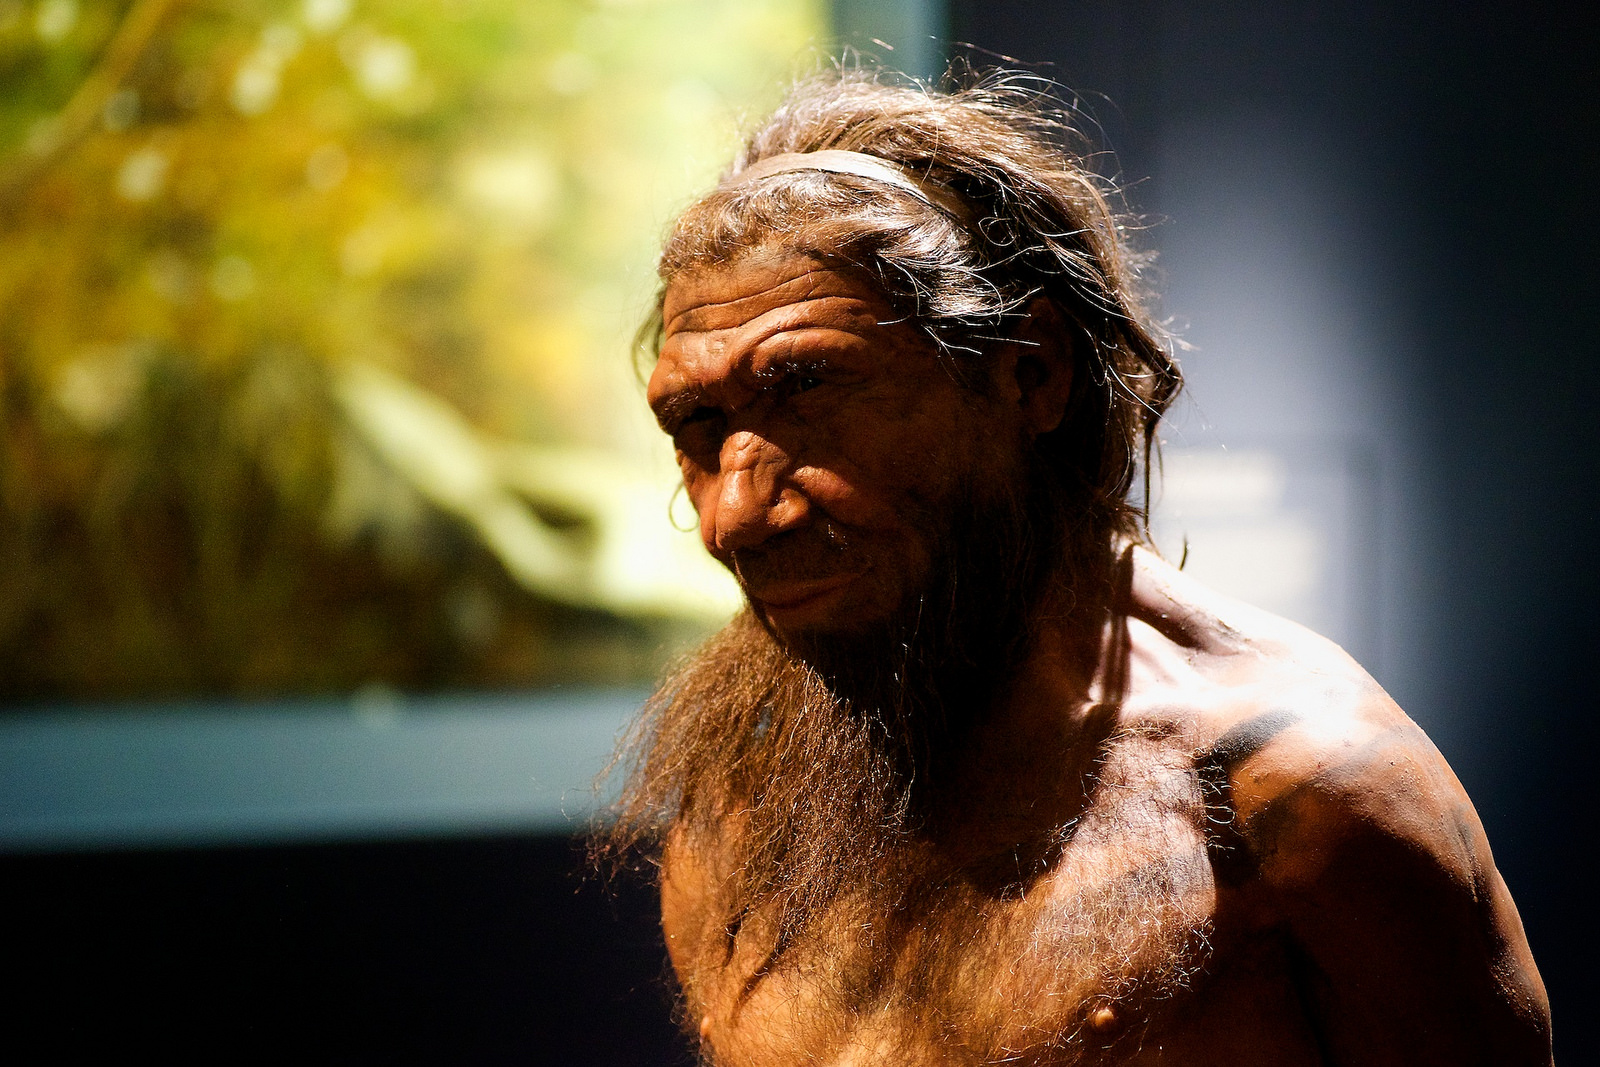 The photograph features a large recreated model of a neanderthal.